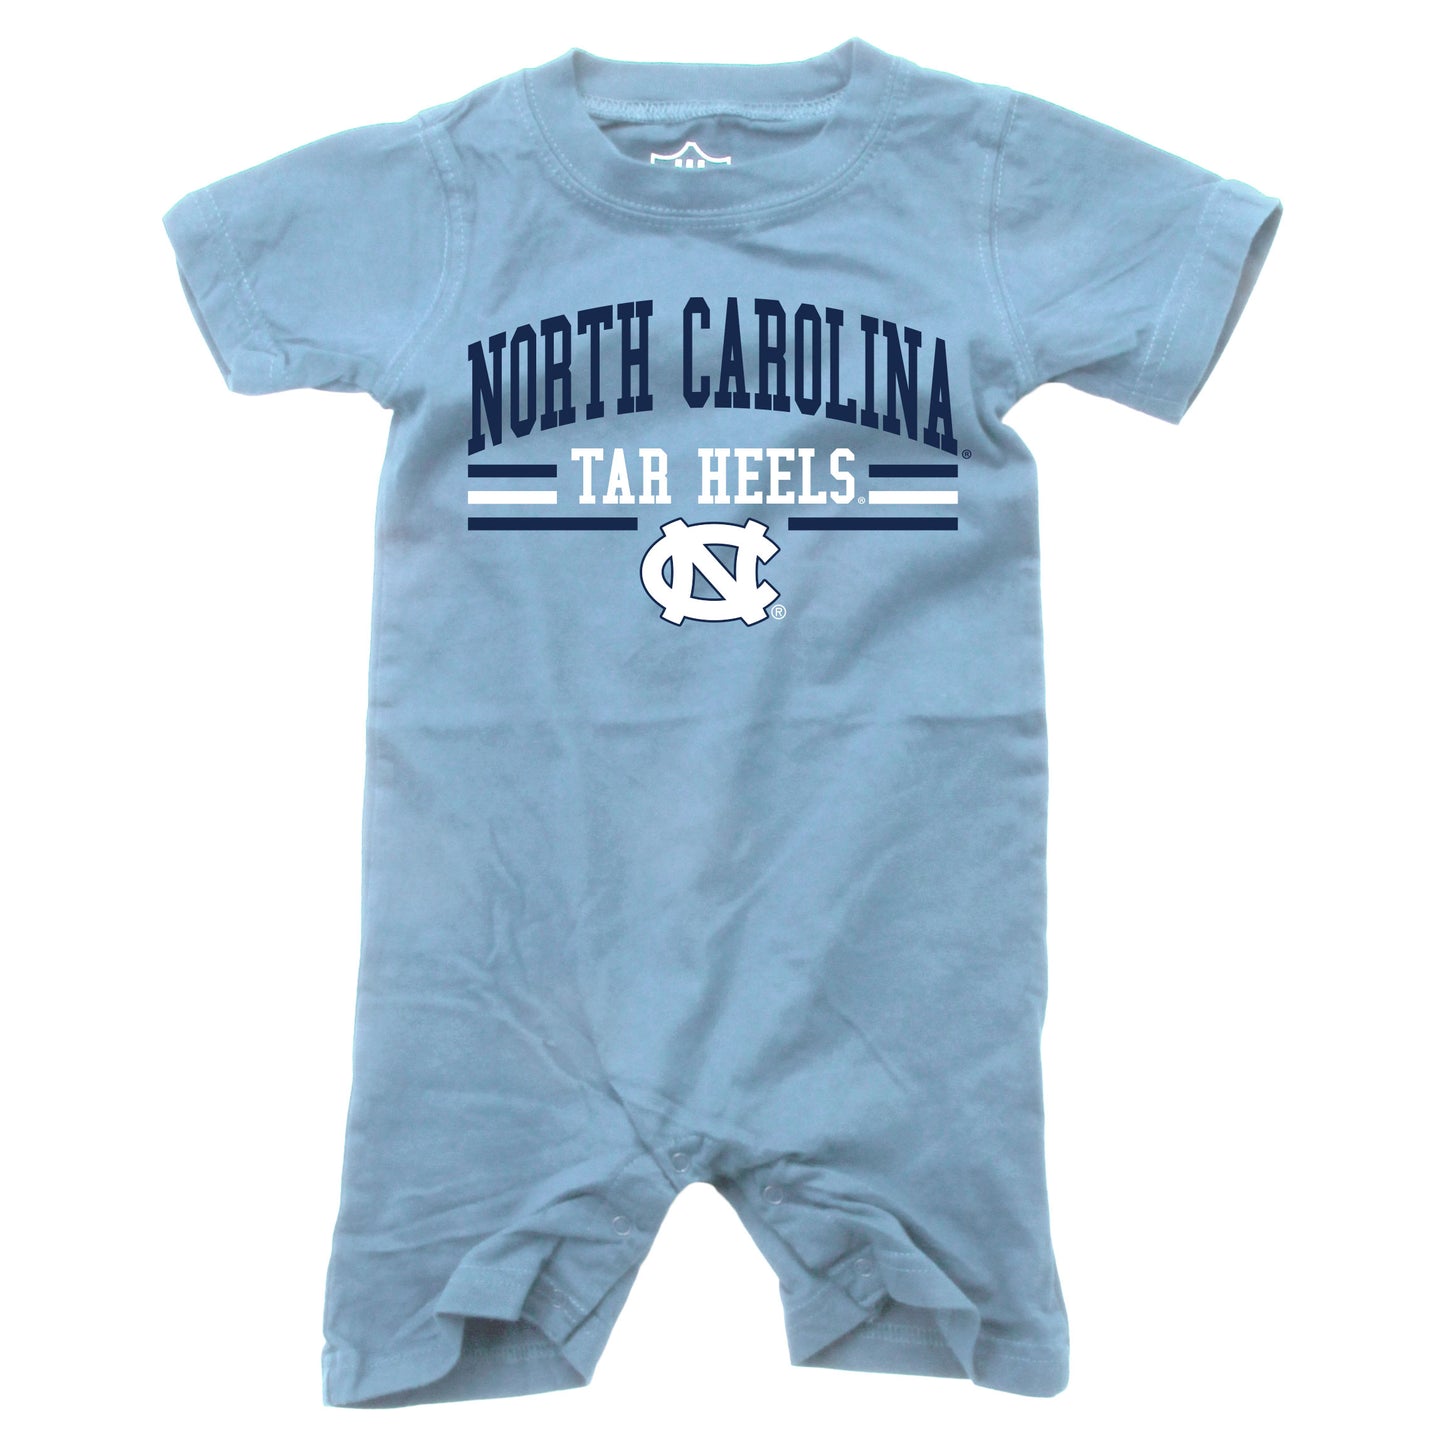 North Carolina Tar Heels Wes and Willy Baby College Team Shorts Romper